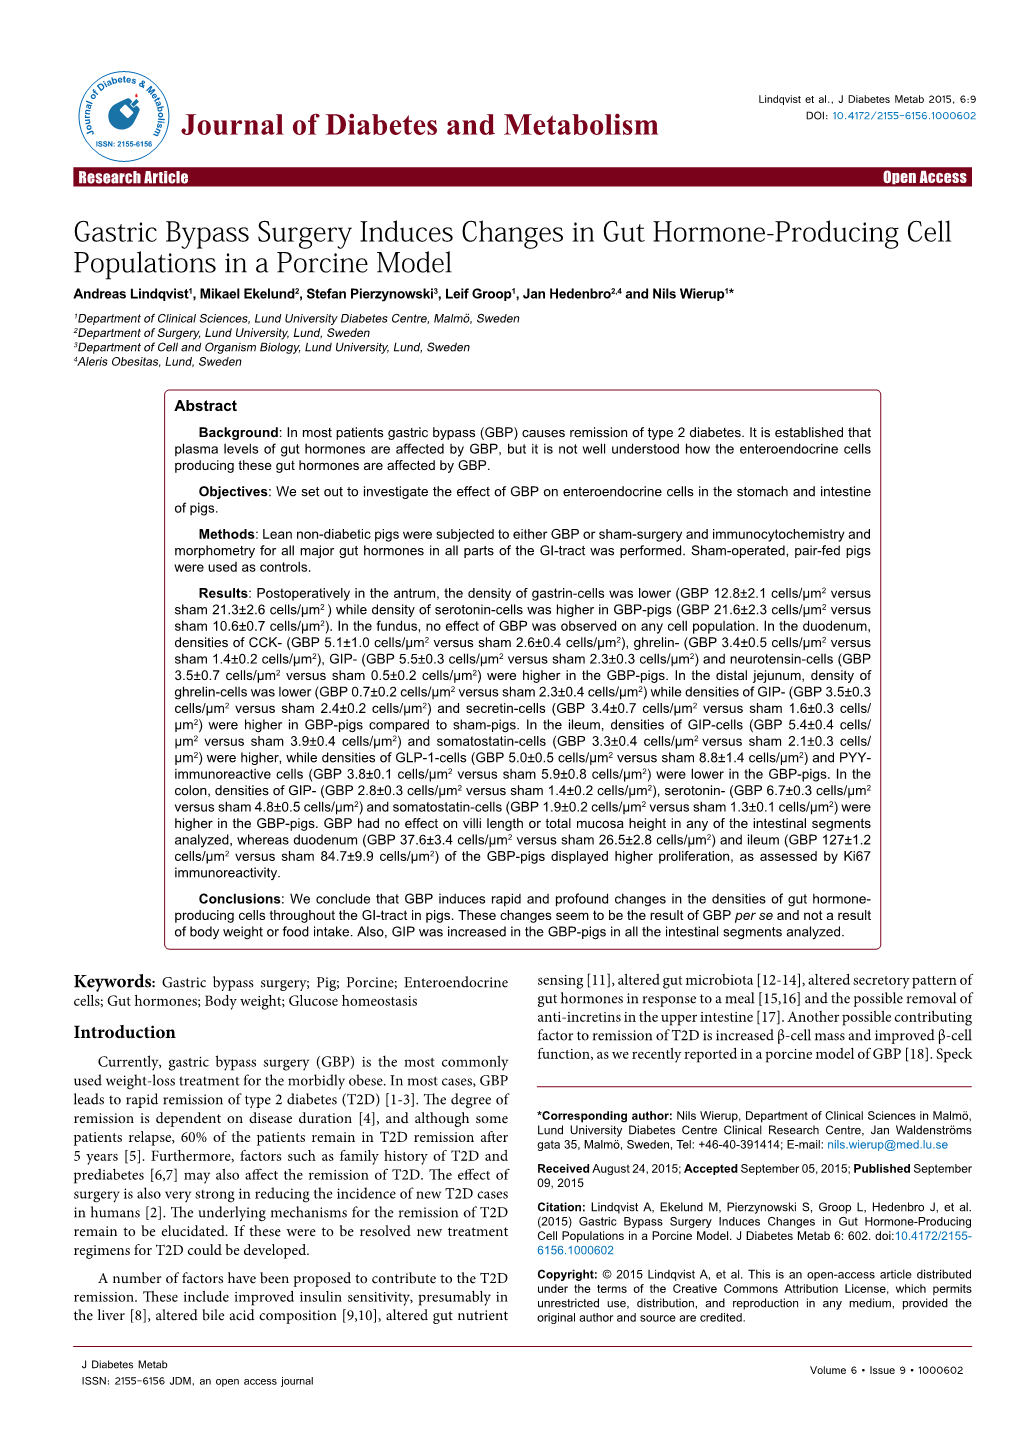 Gastric Bypass Surgery Induces Changes in Gut Hormone-Producing Cell Populations in a Porcine Model